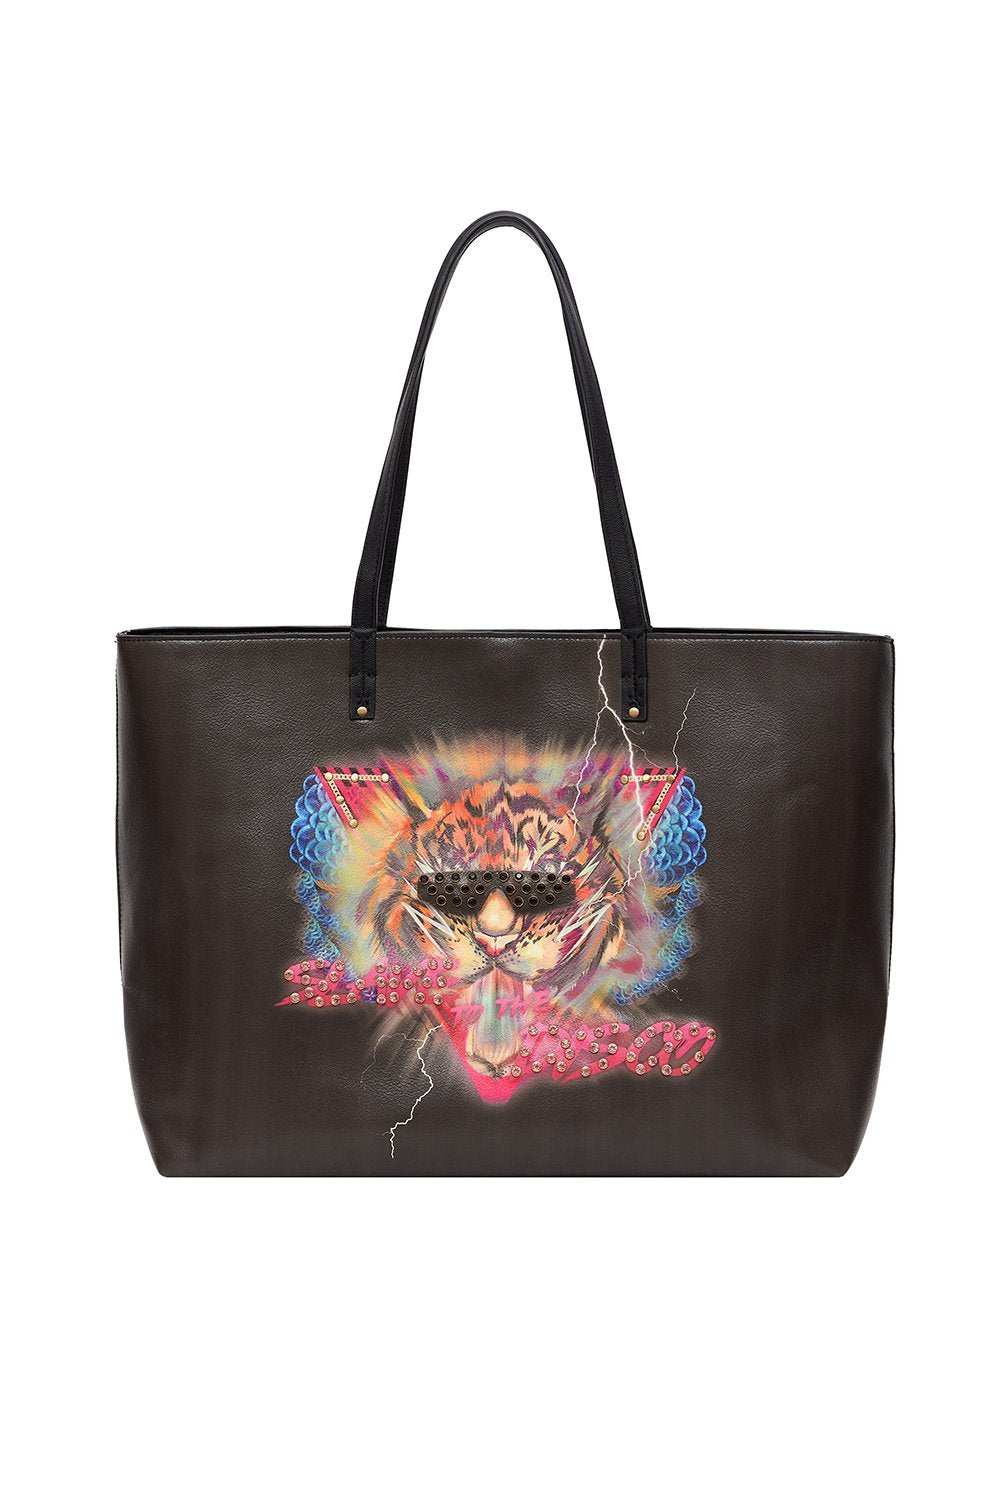 VEGAN LEATHER EAST WEST TOTE SLAVE TO THE RHYTHM